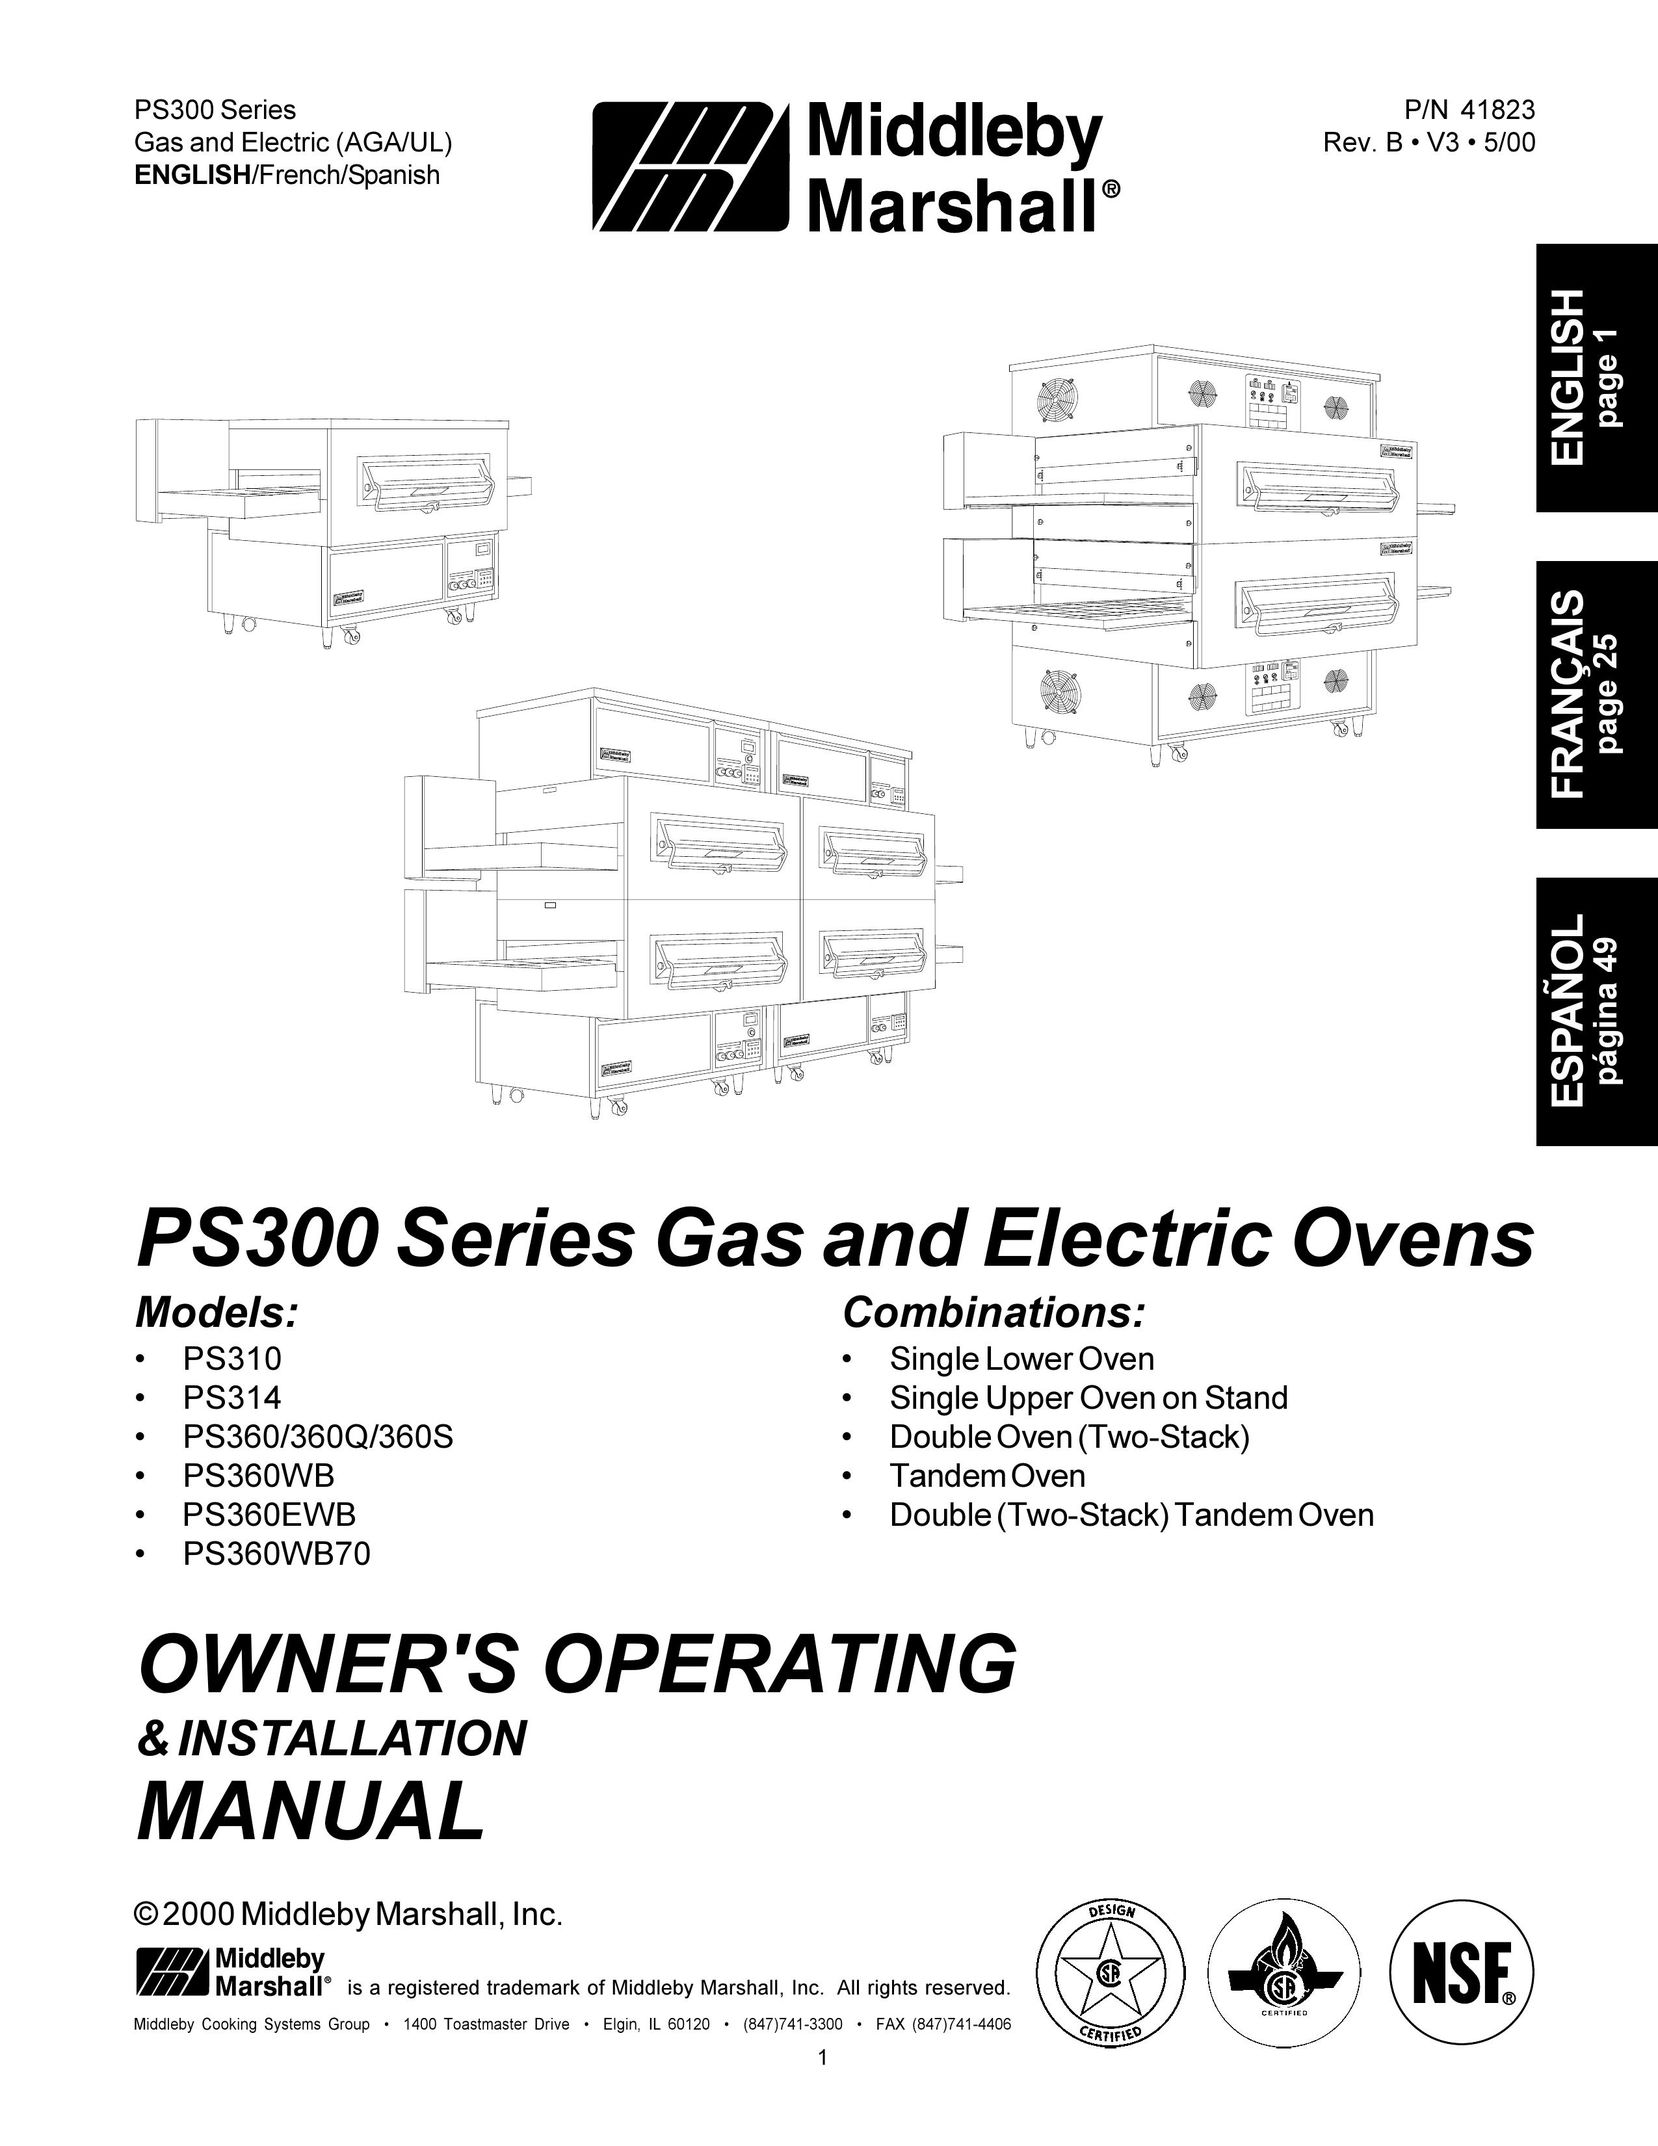 Middleby Marshall PS314 Oven User Manual